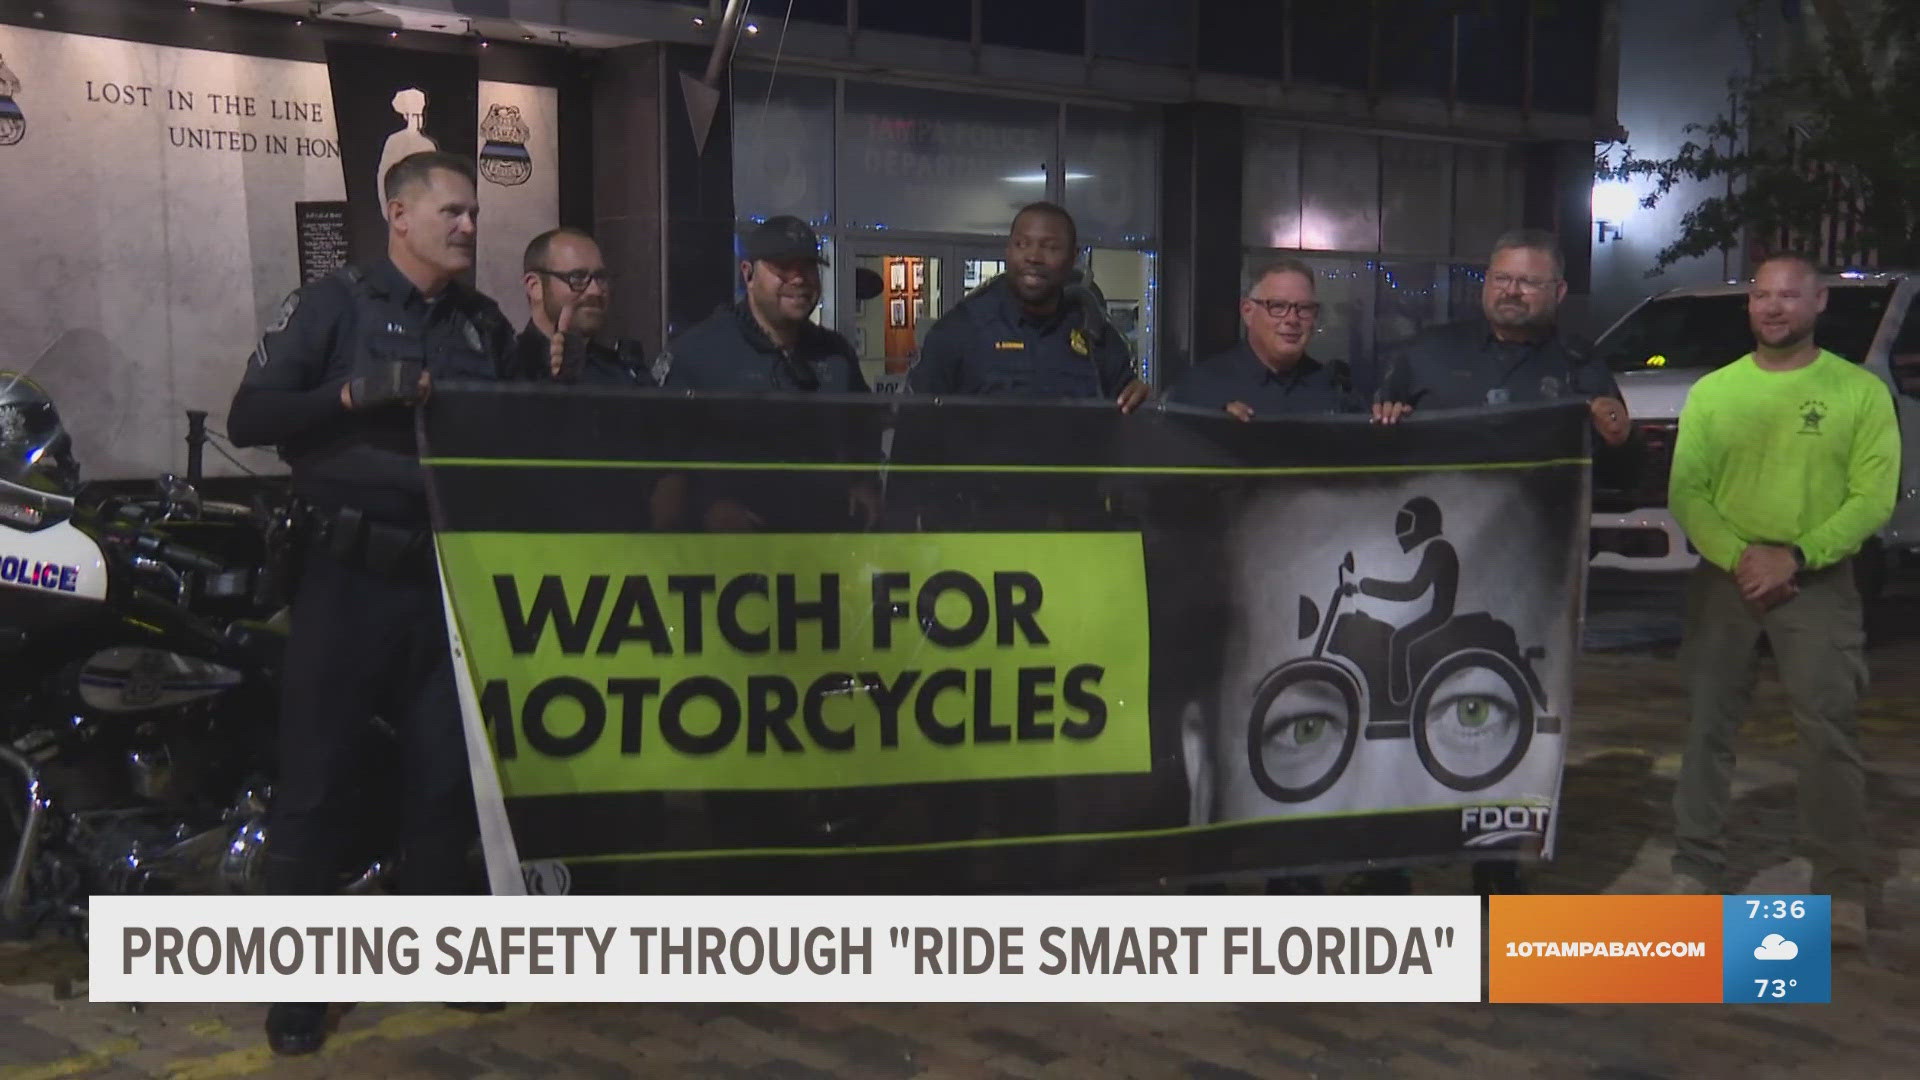 Tampa police are riding across the state to promote "Ride Smart Florida," which promotes motorcycle safety.